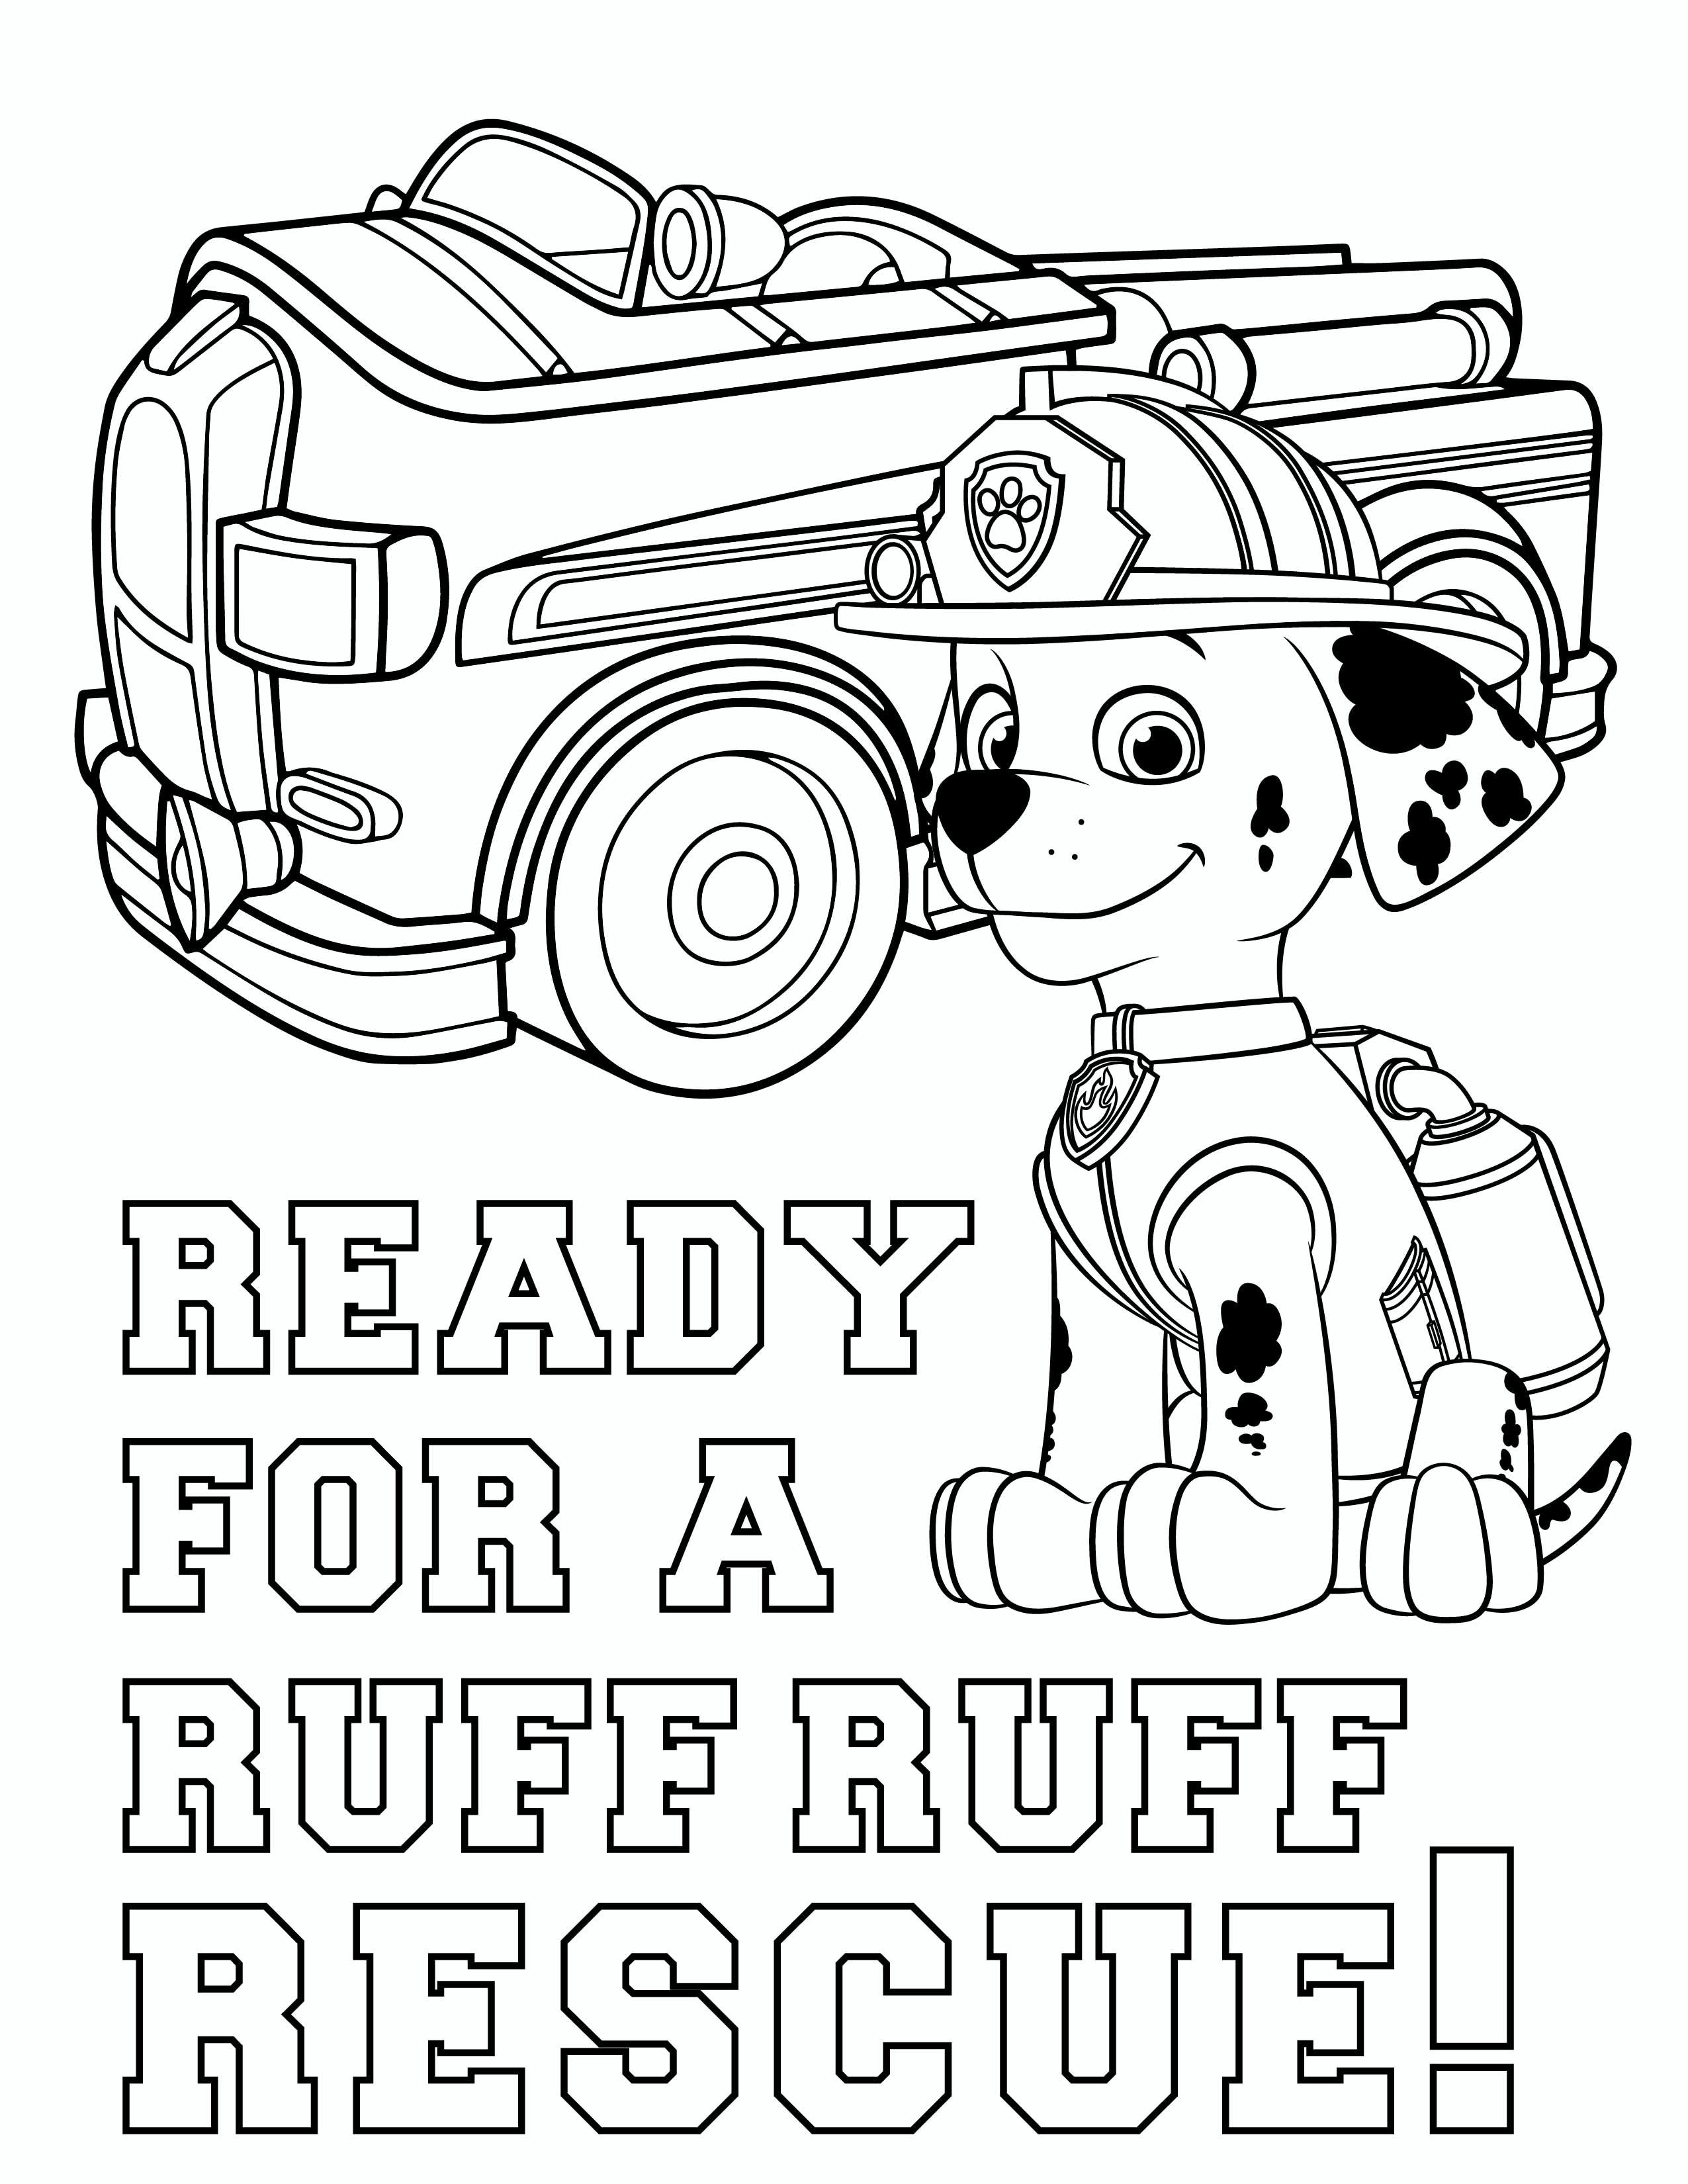 Coloring Pages : Paw Patrol Coloring Pages Free Printable Zumapaw - Free Printable Paw Patrol Coloring Pages